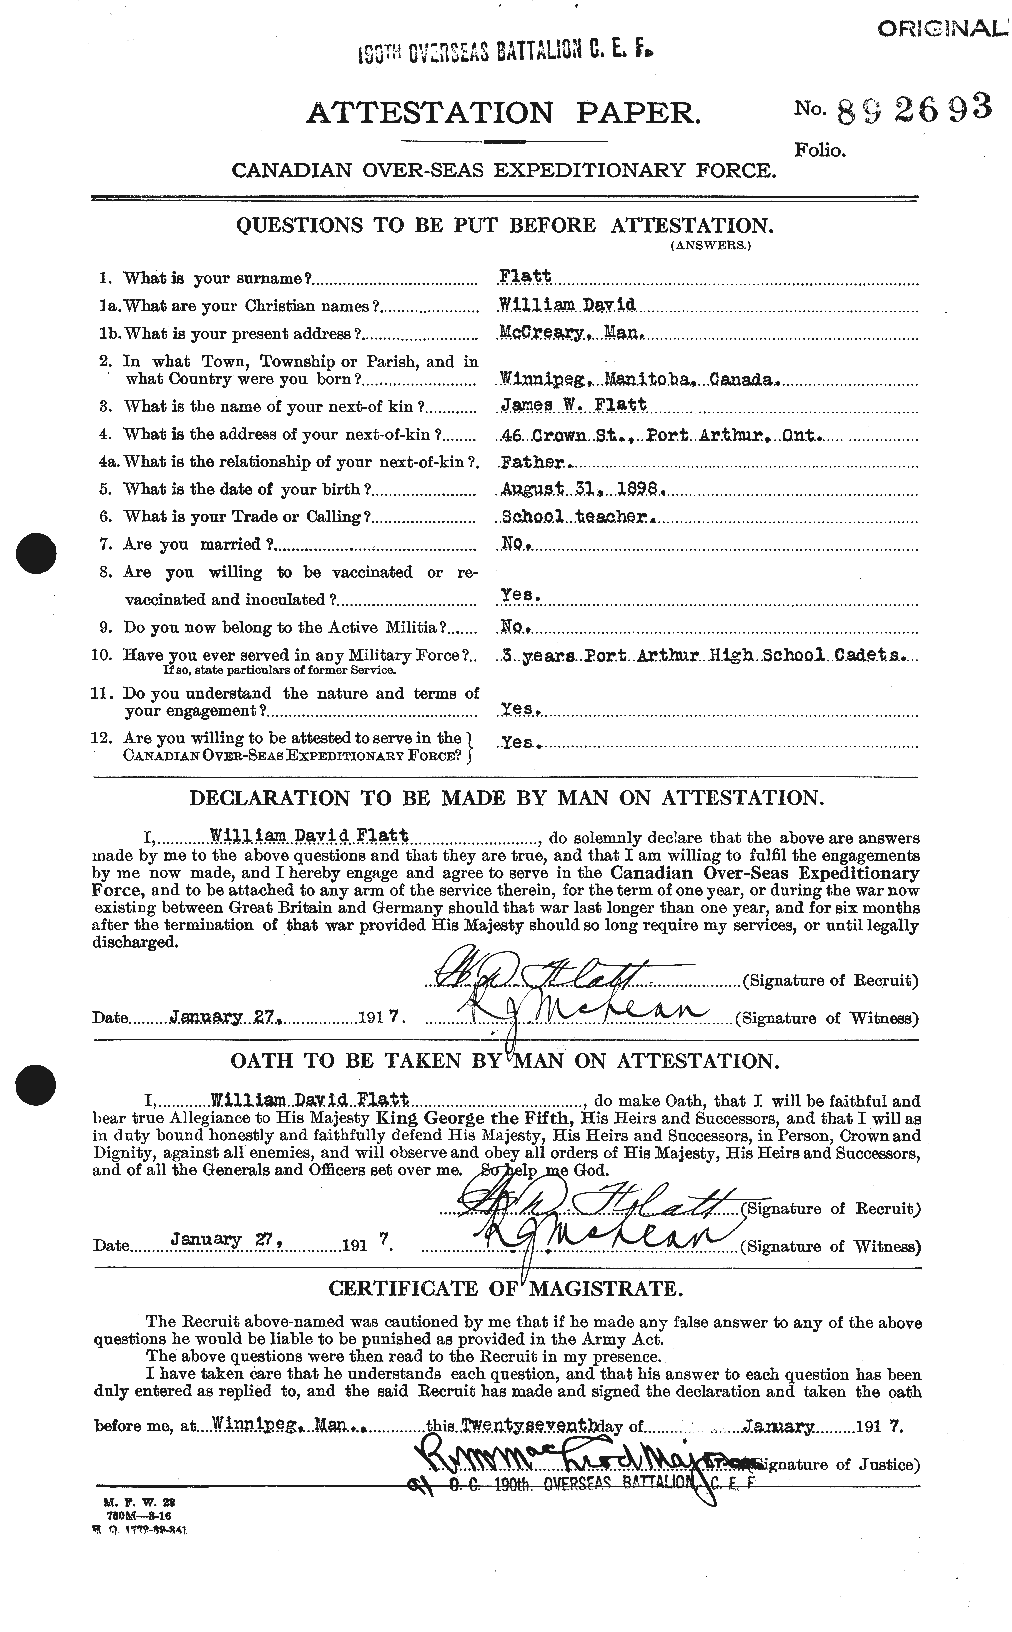 Personnel Records of the First World War - CEF 326253a